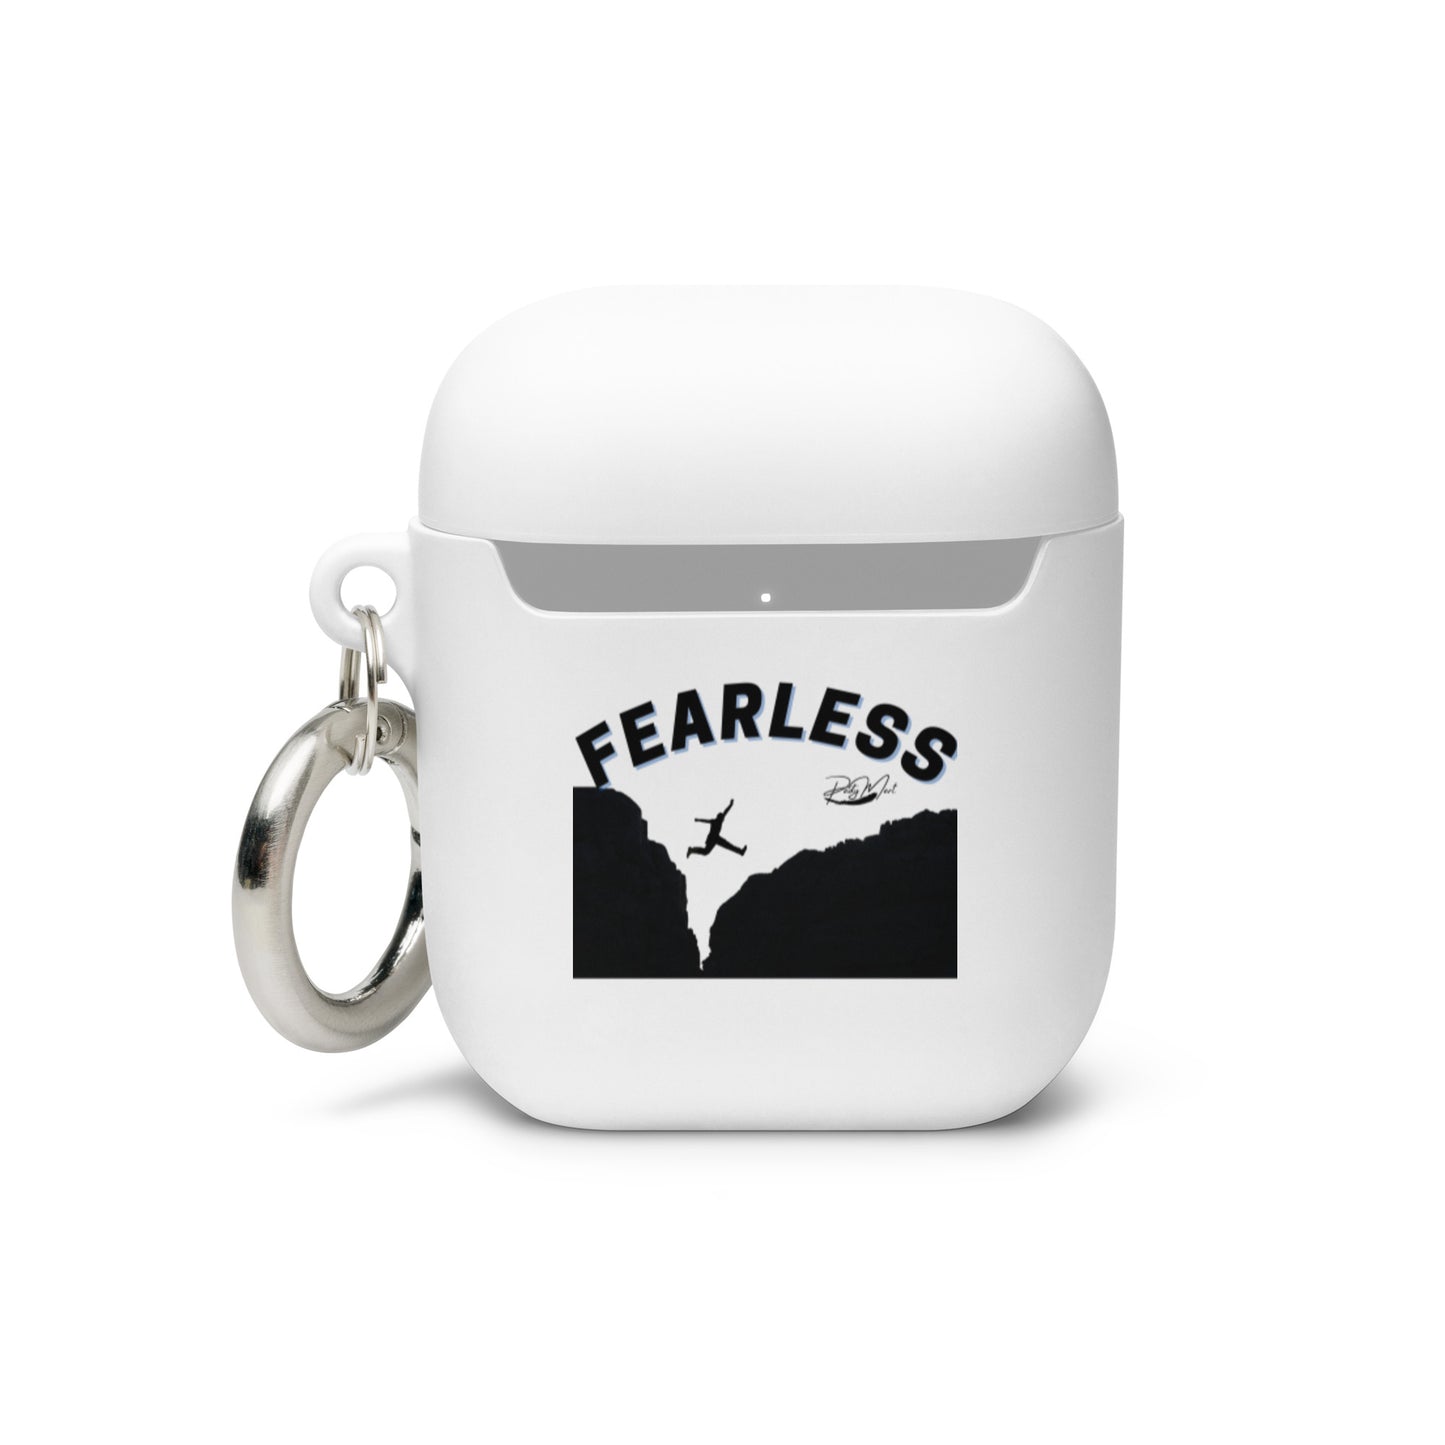 Fearless AirPods case